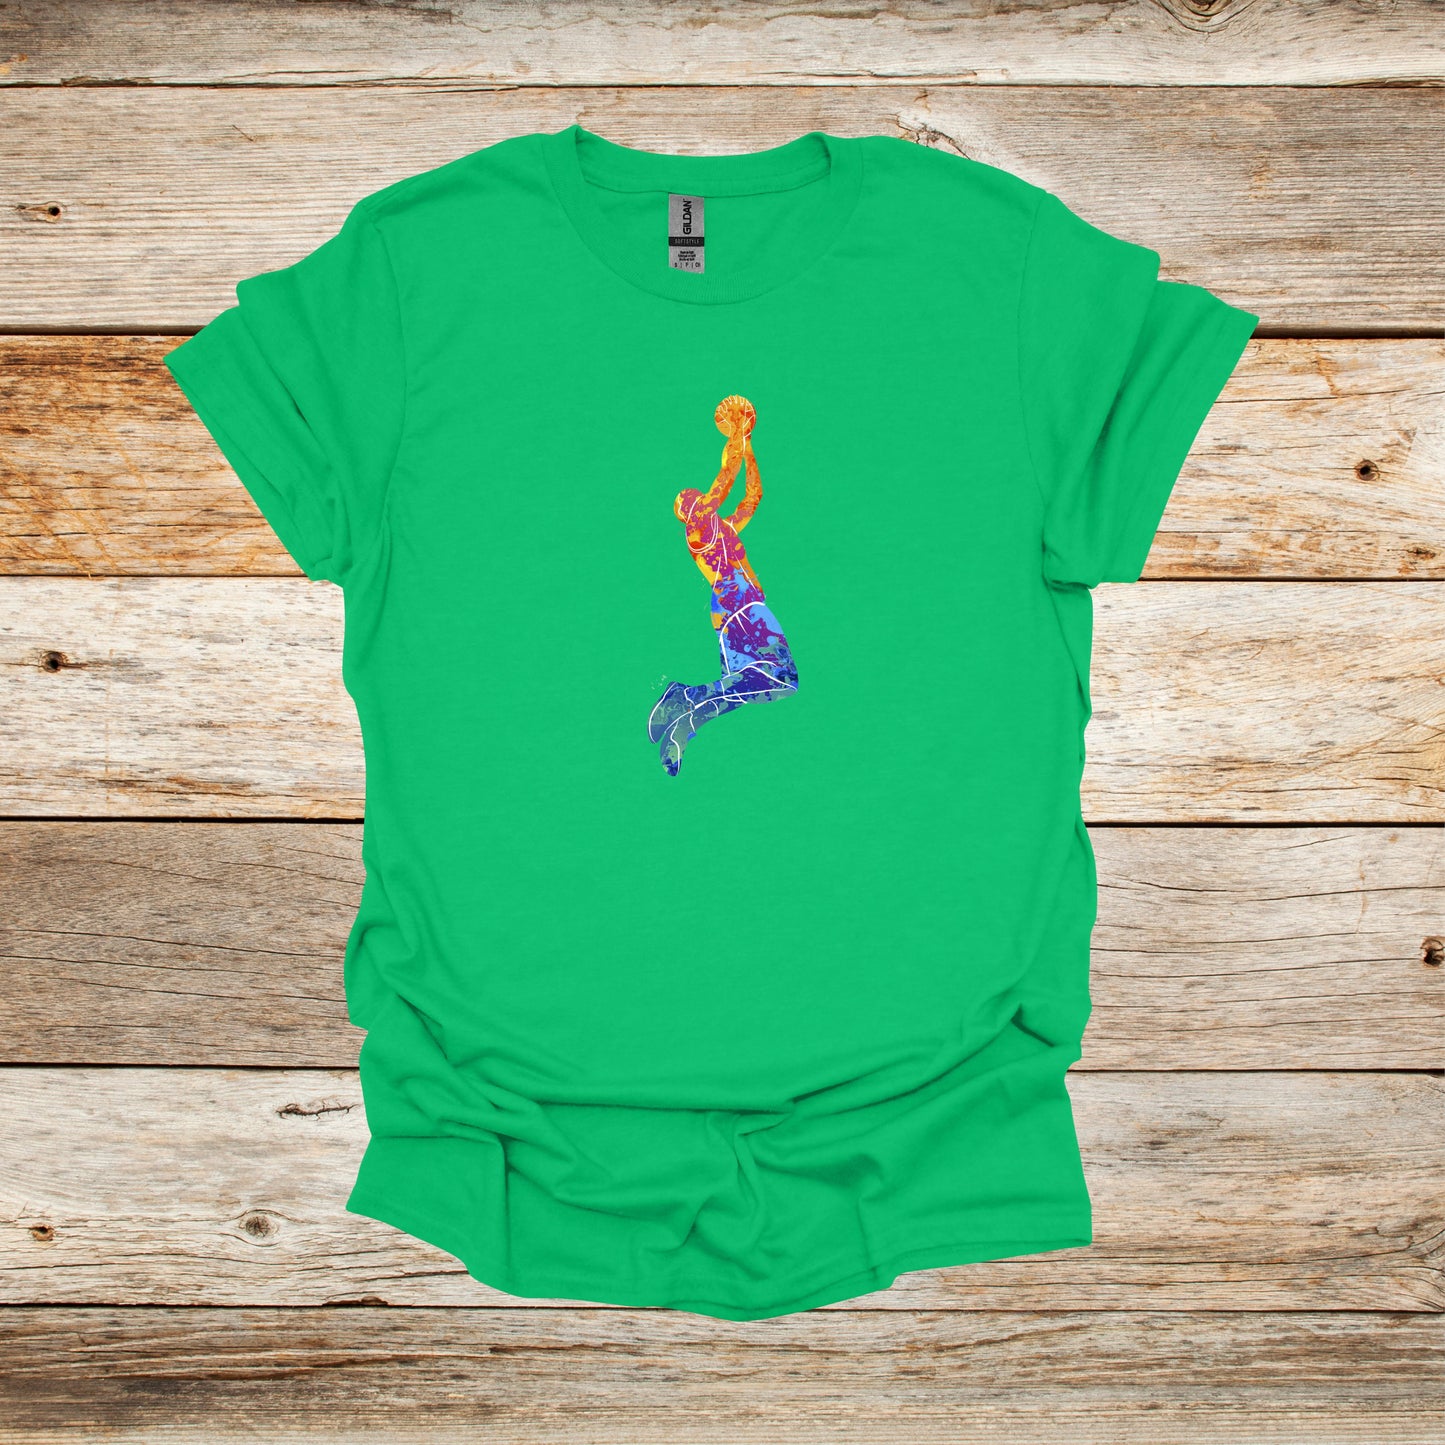 Basketball T-Shirt - Jump Shot - Adult and Children's Tee Shirts - Sports T-Shirts Graphic Avenue Kelly Green Adult Small 